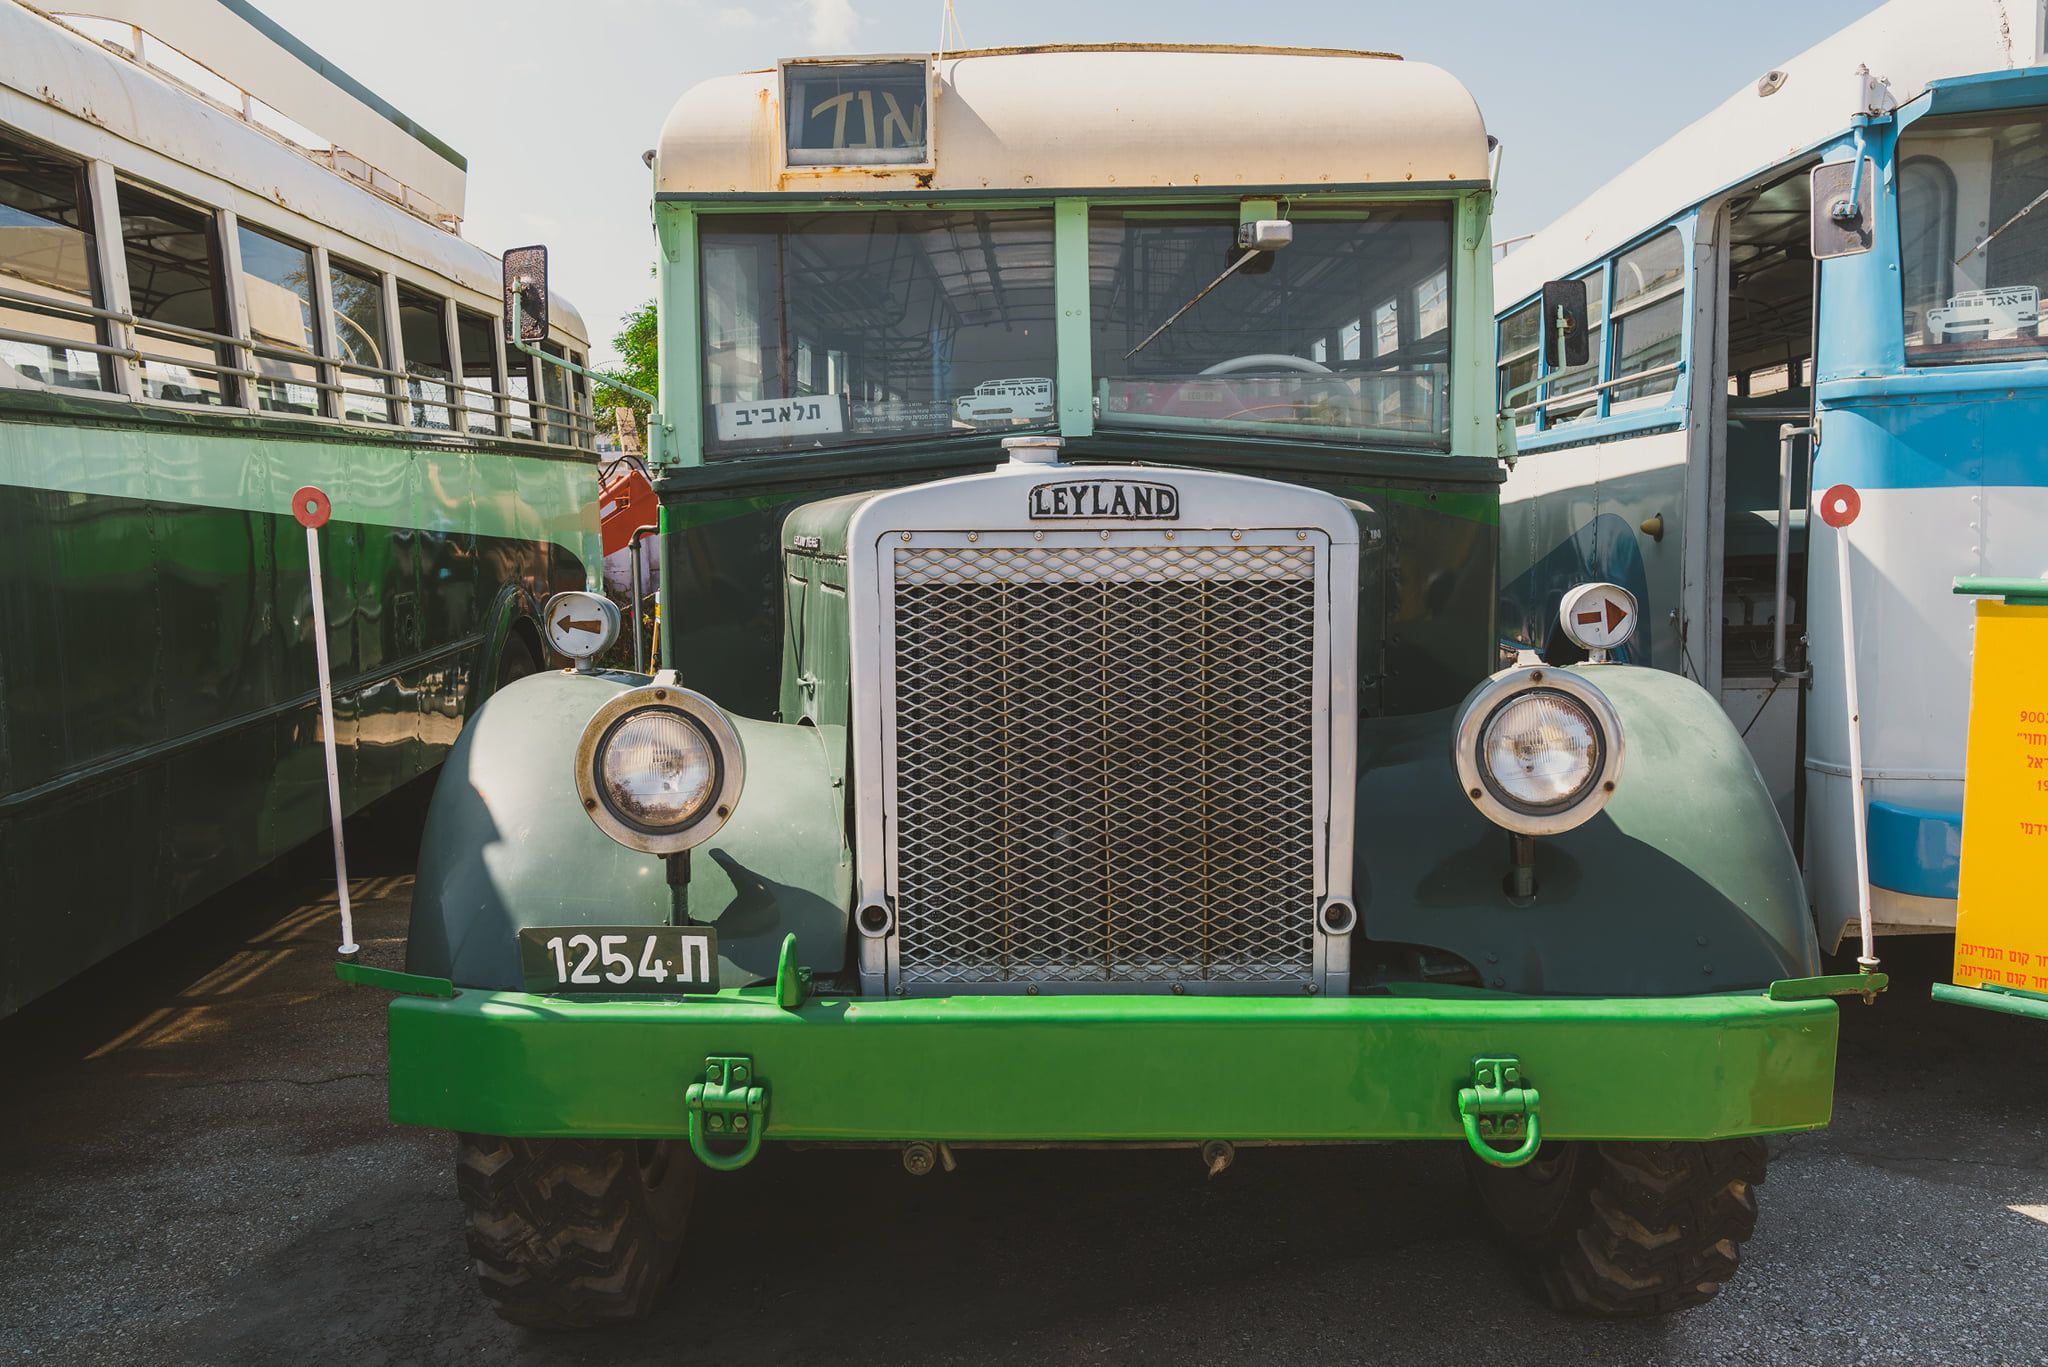   Vintage Egged bus from the Egged Bus Museum in Holon